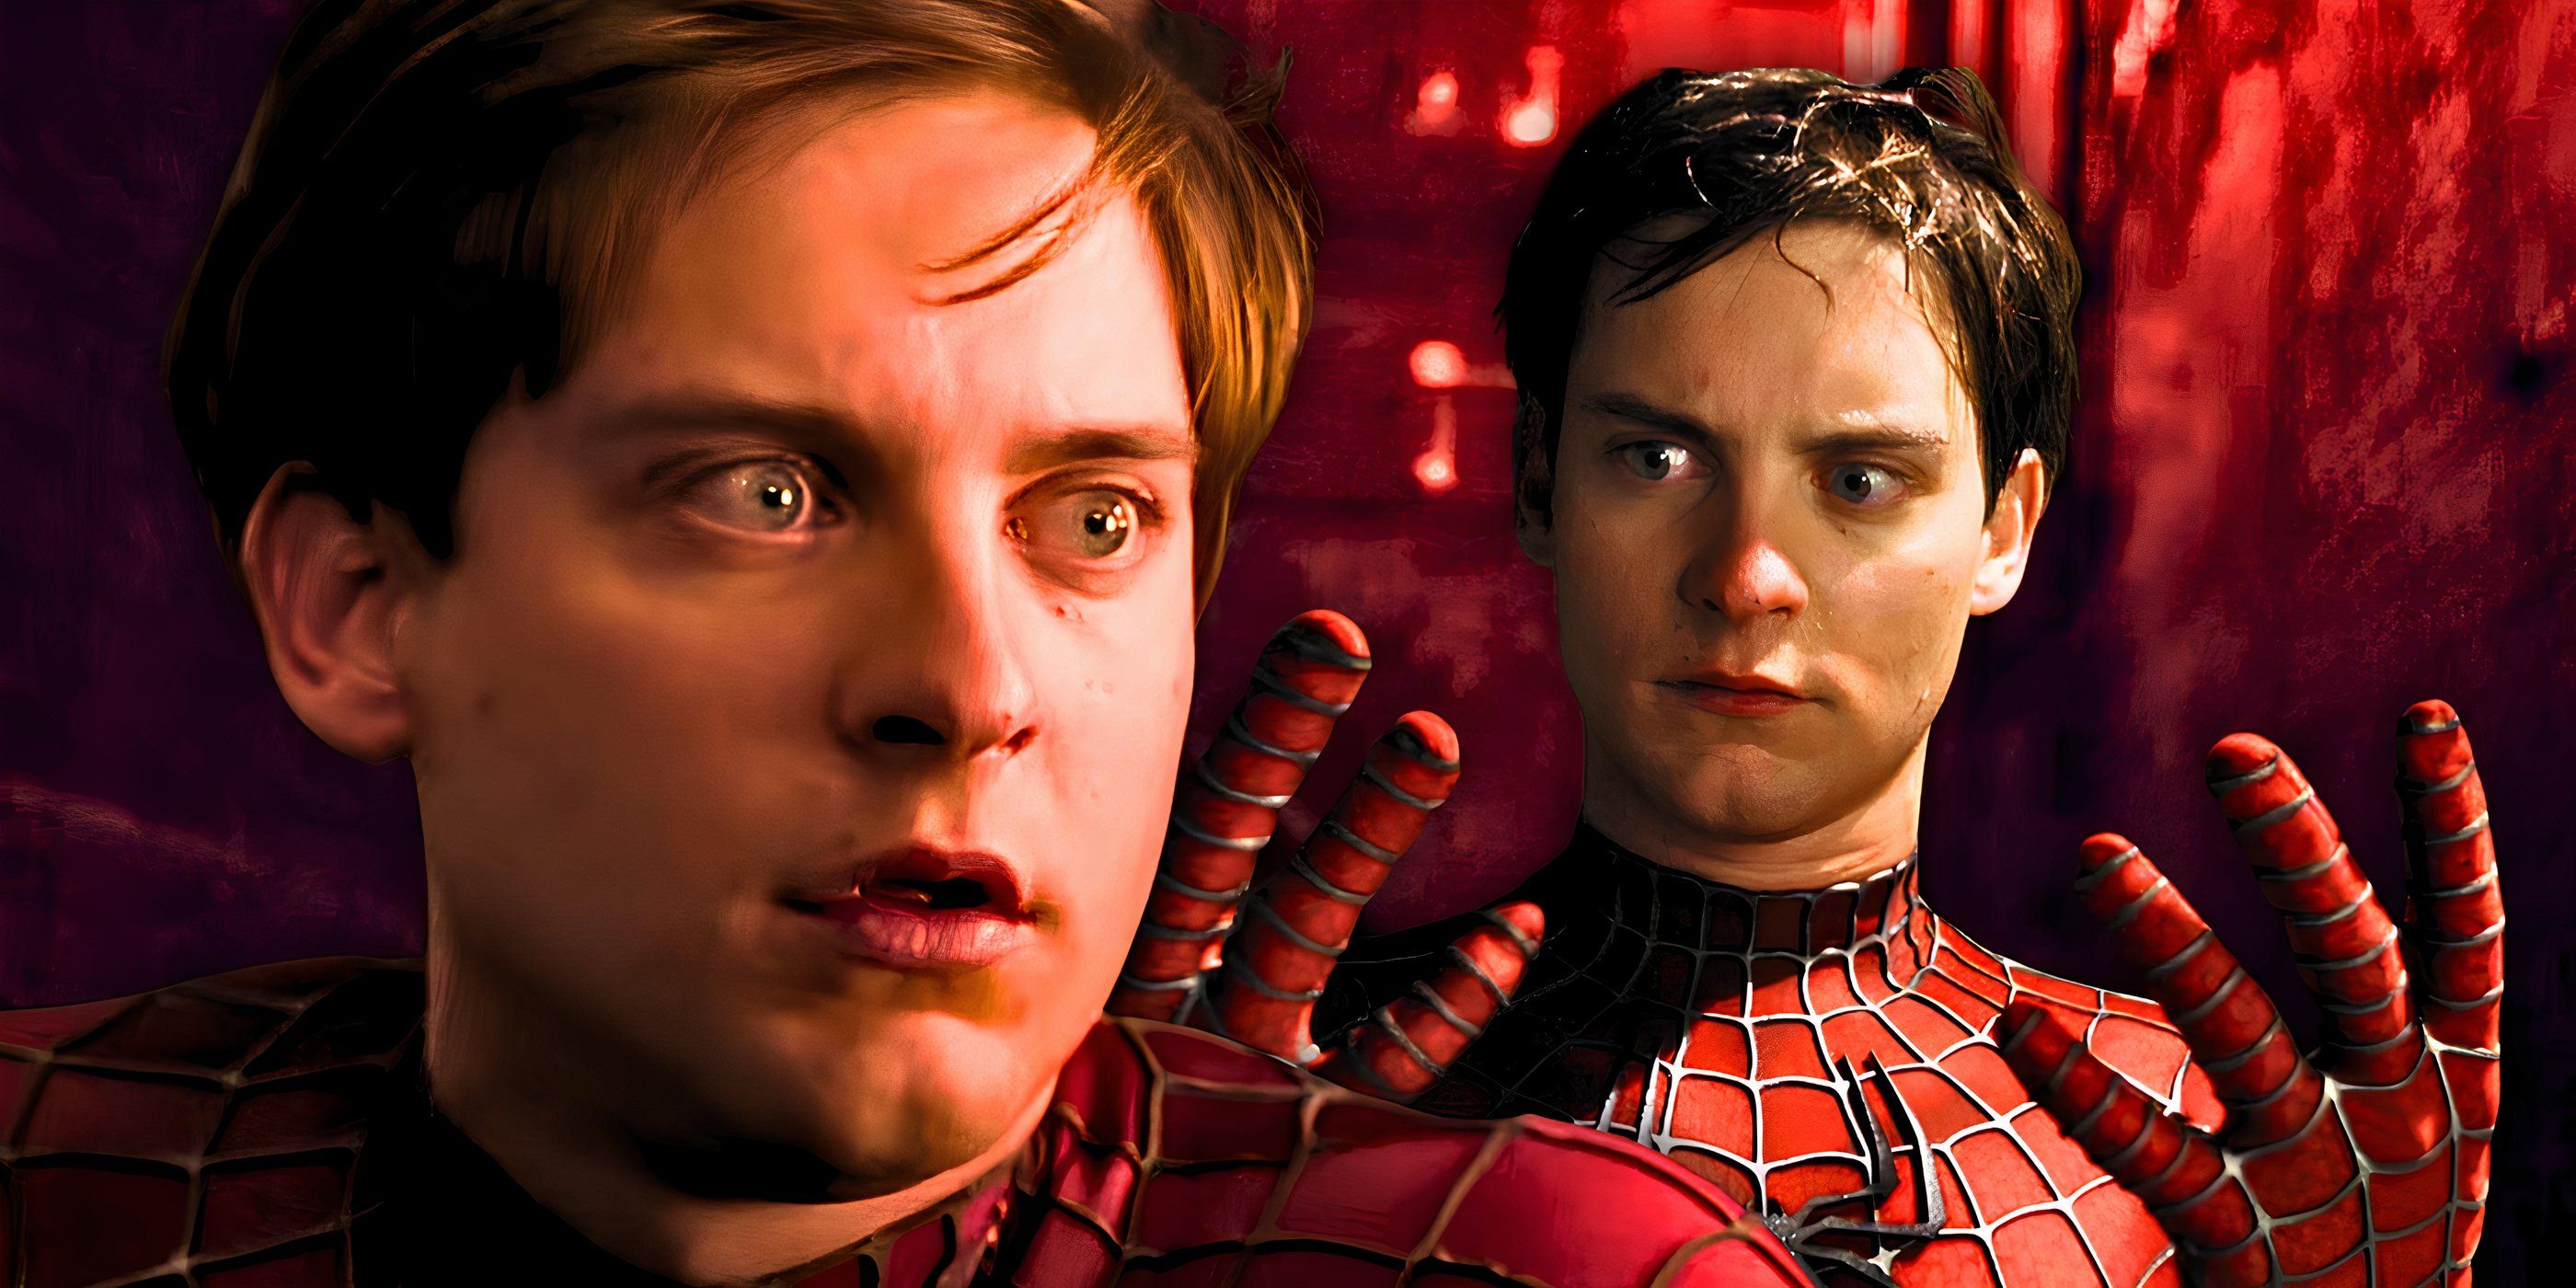 Tobey Maguire looks surprised and looks at his hands as Spider-Man